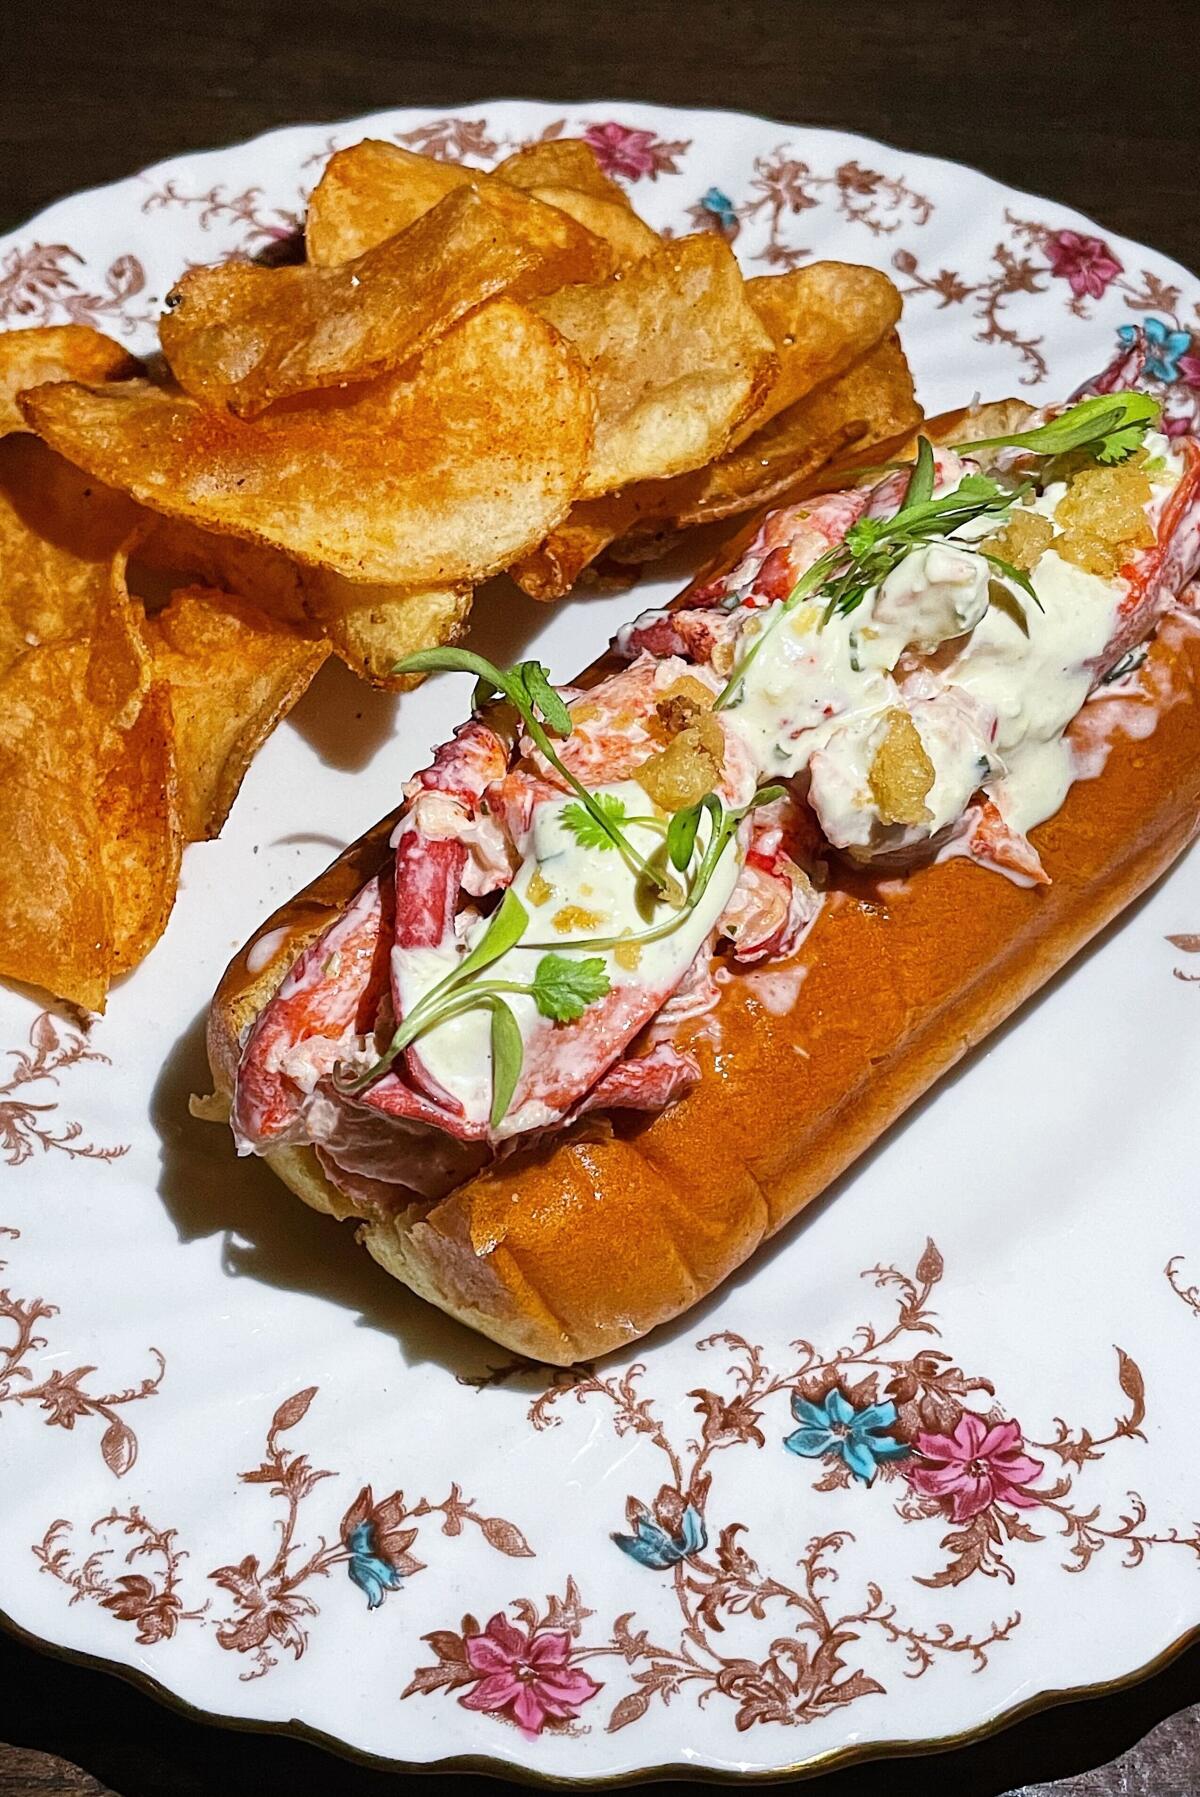 A lobster roll topped with tempura leeks on a flowered plate, with a side of chips